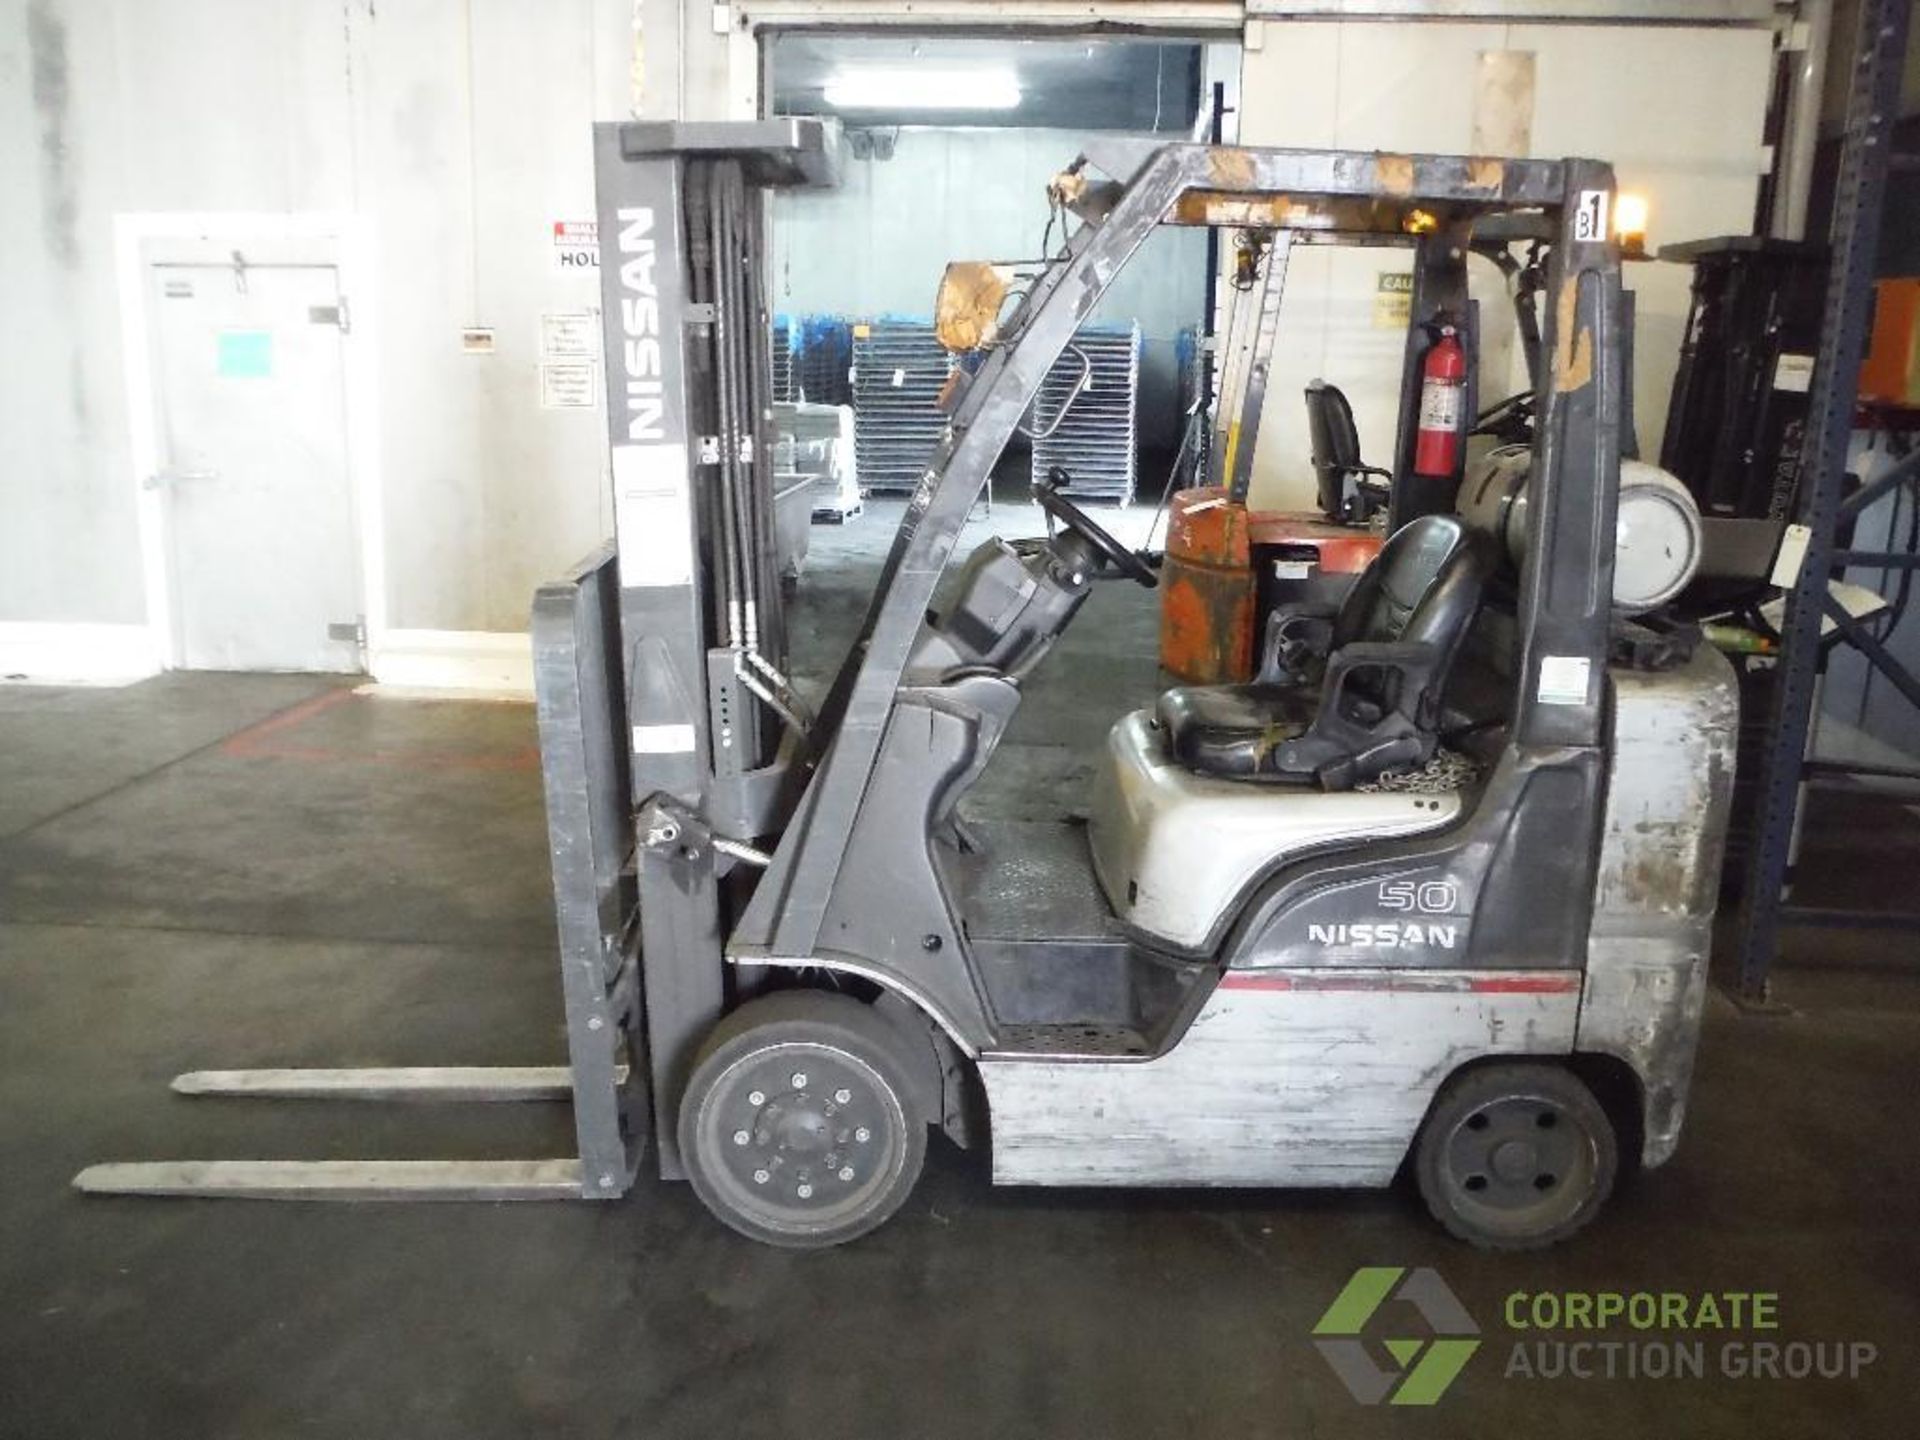 Nissan propane forklift, Model MCP1F2A25LV, SN G95213, 4700 lb. capacity, 3 stage mast, 187 in. lift - Image 2 of 7